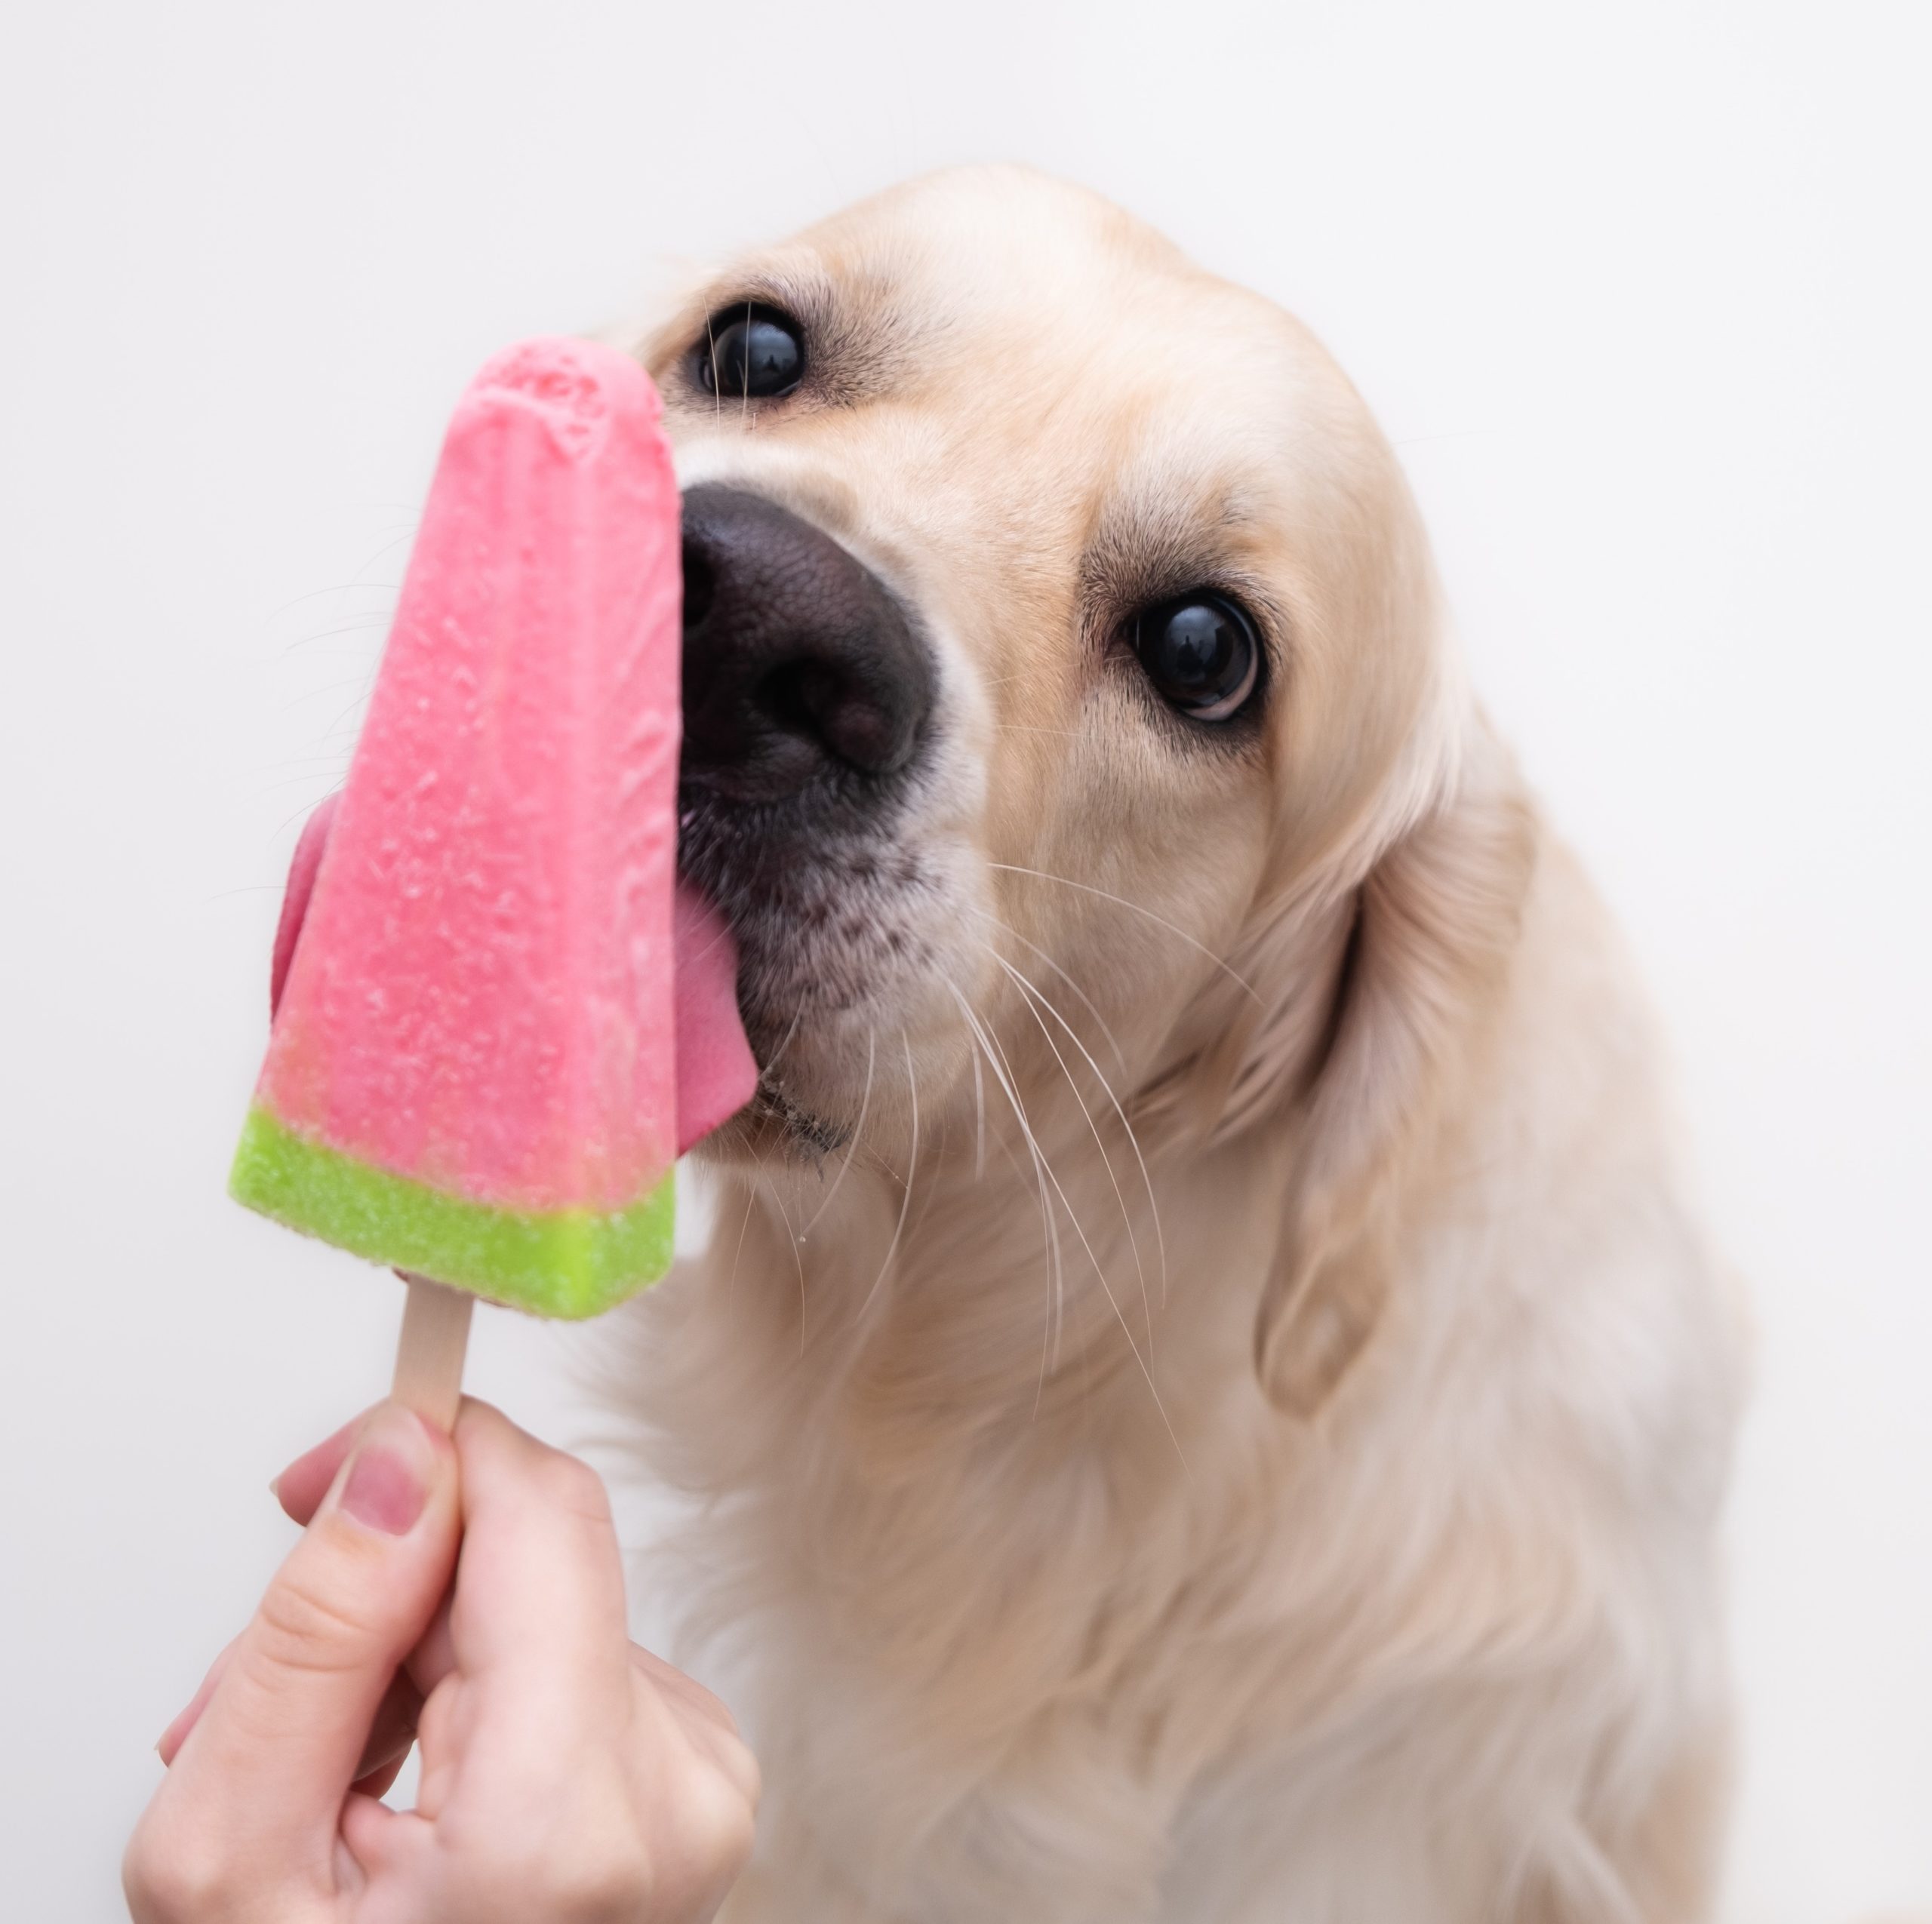 A Golden with a popsicle.